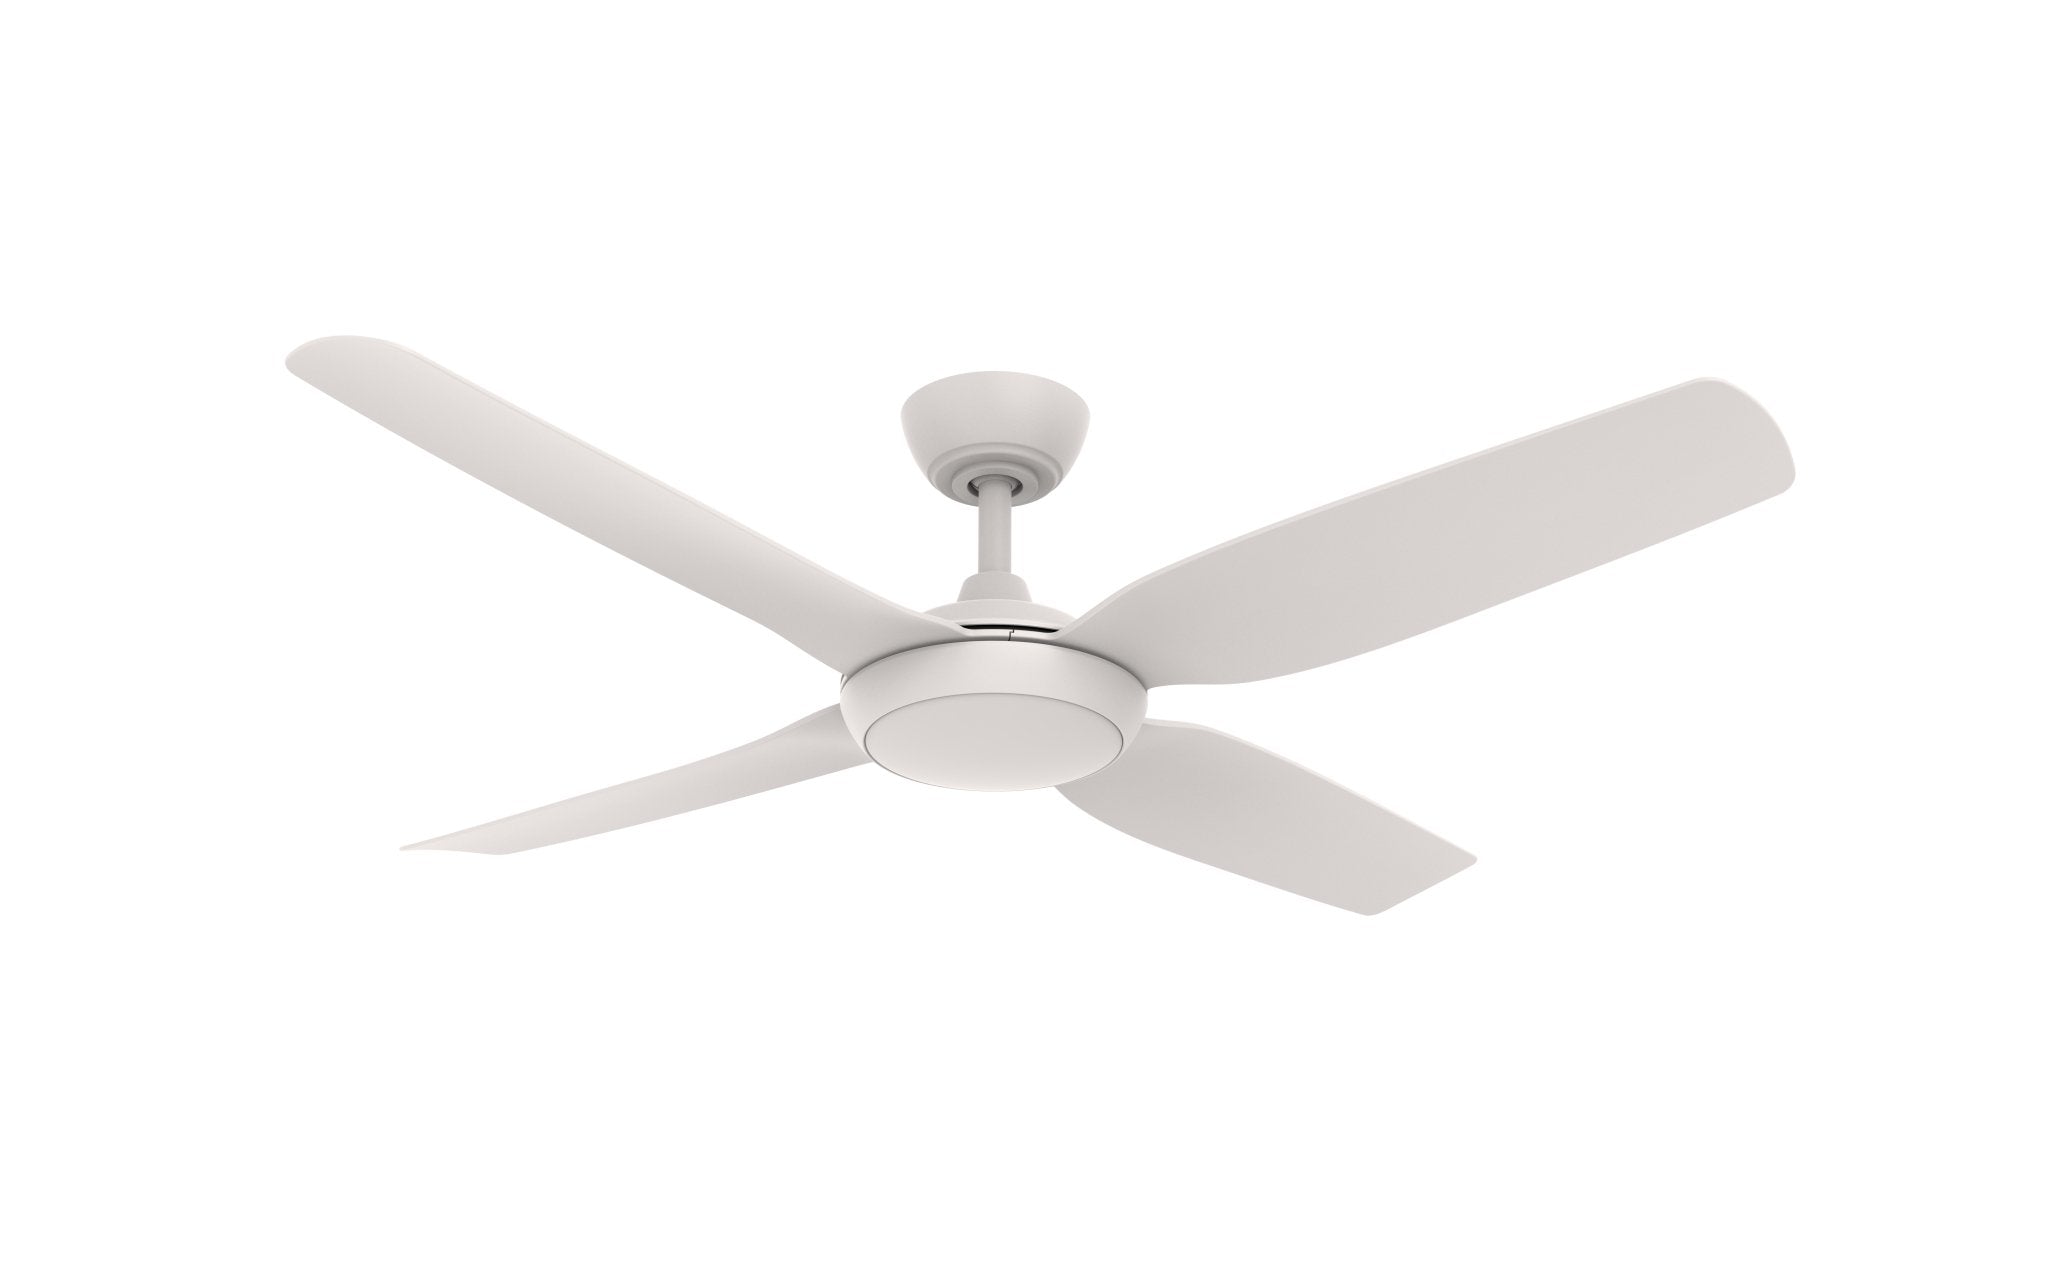 Viper DC 52″ 4 Blade Smart Ceiling Fan With WIFI Remote Control + LED Light White by Martec - Mases LightingMartec